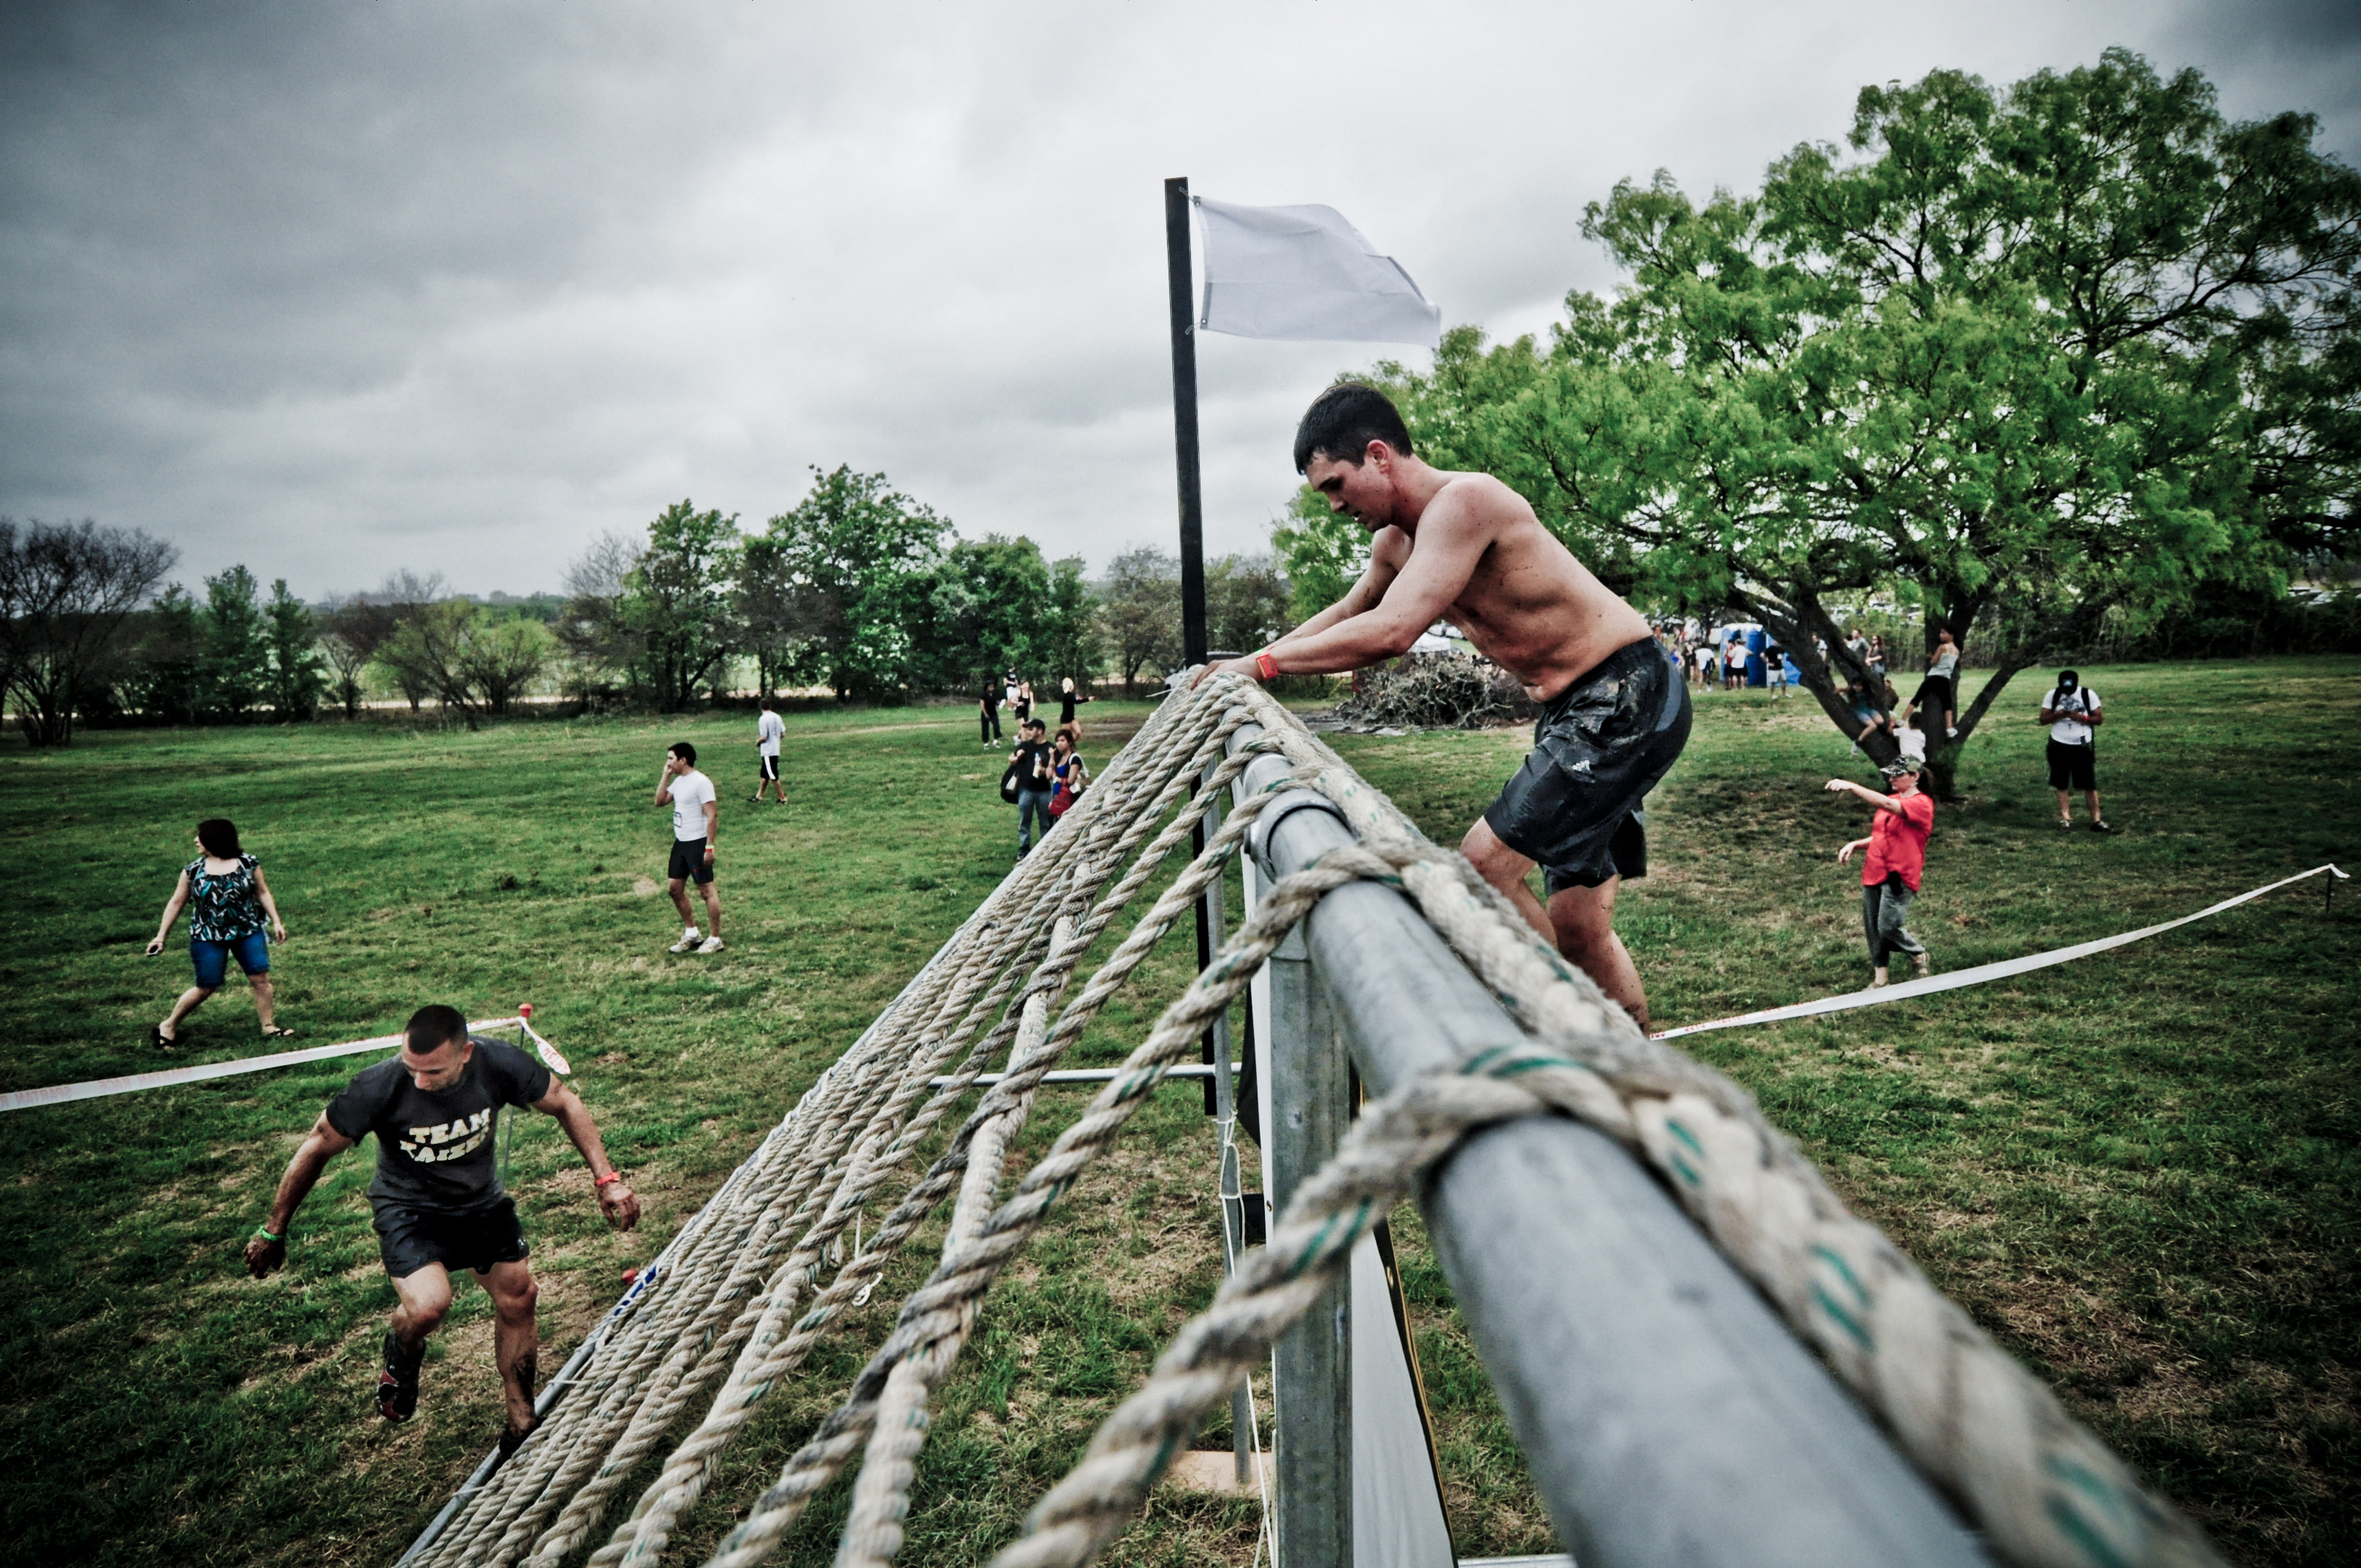 Obstacle Races Are Fitness Fun | Health&Fitness Talk